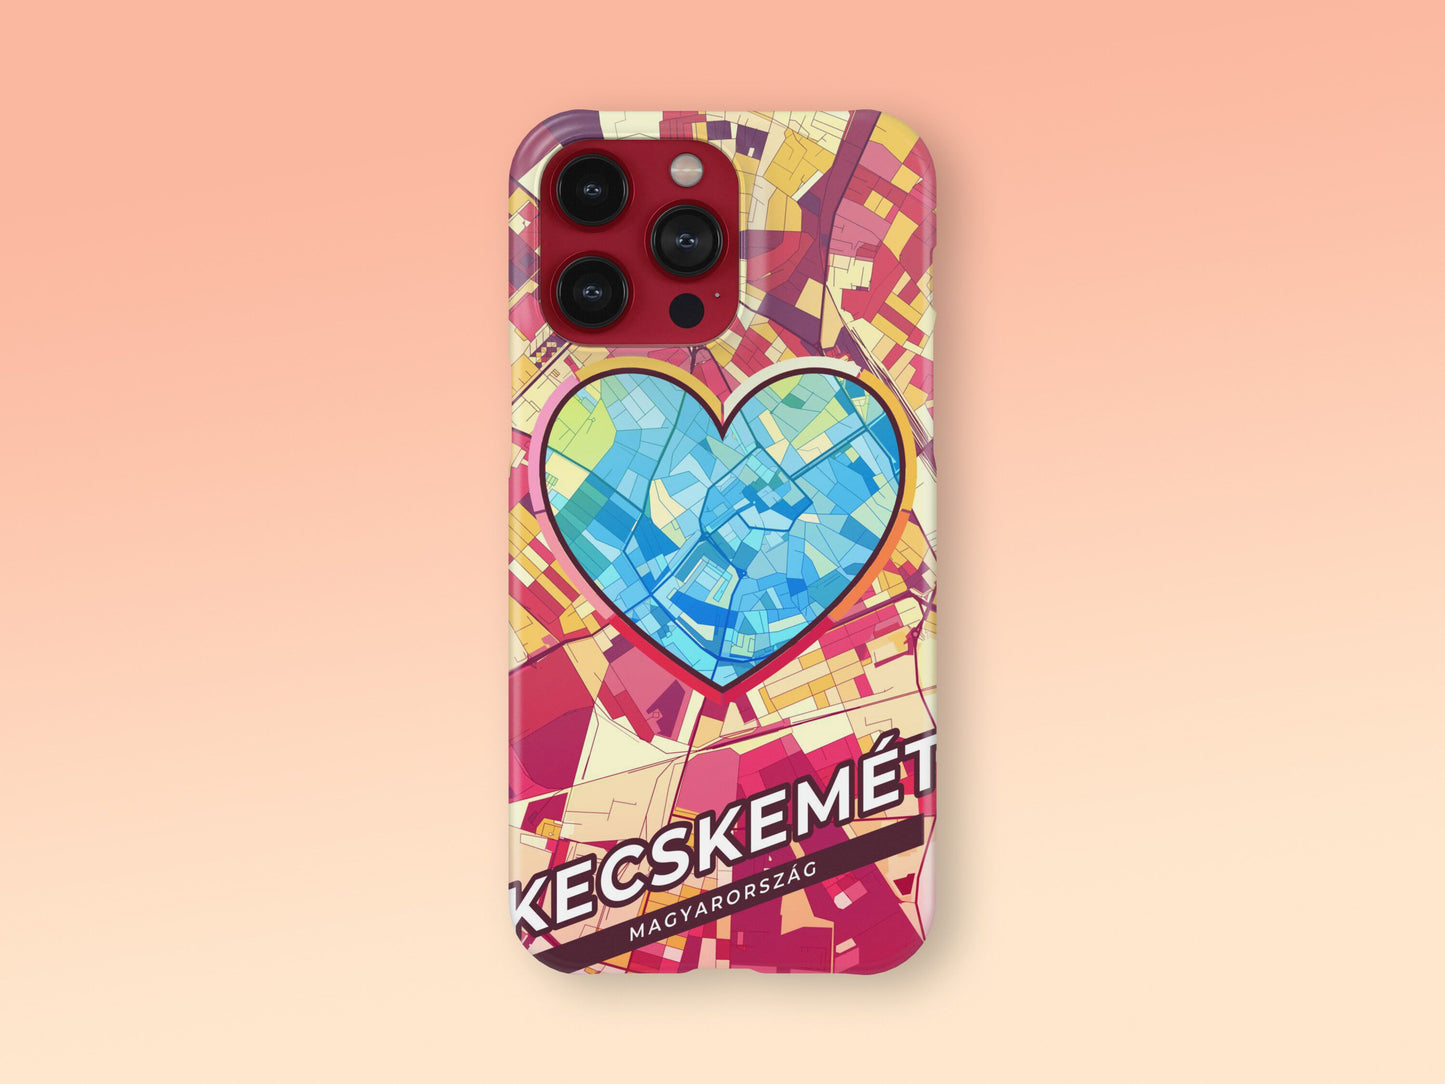 Kecskemét Hungary slim phone case with colorful icon. Birthday, wedding or housewarming gift. Couple match cases. 2